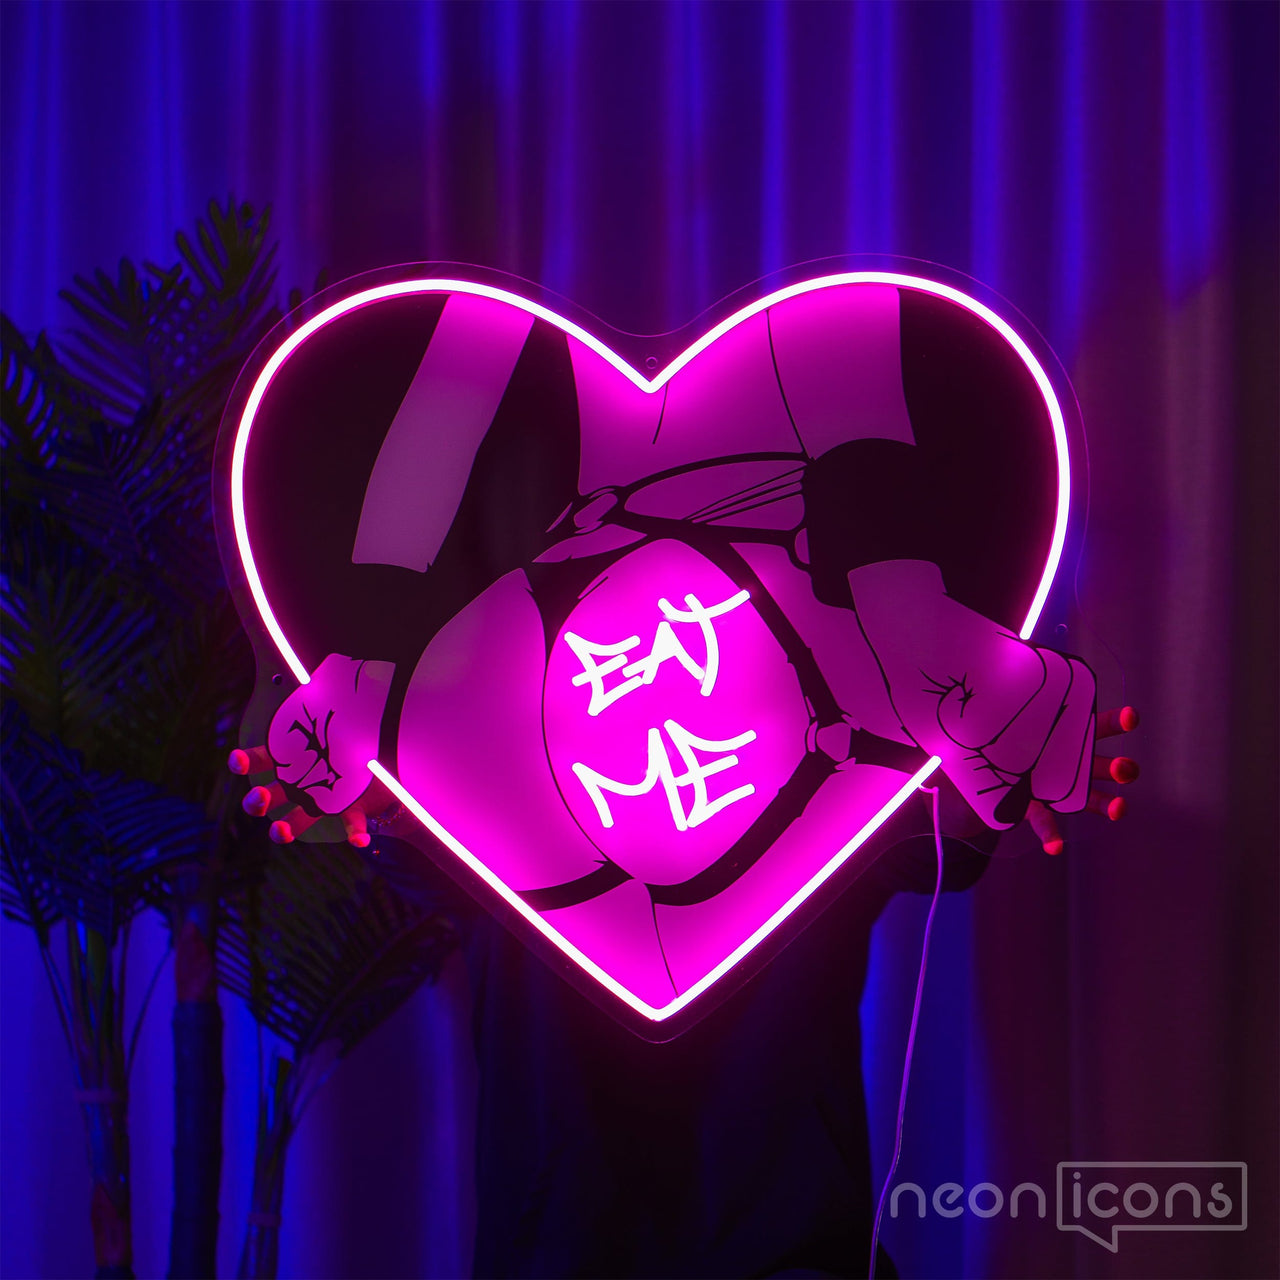 "Eat Me" Neon x Acrylic Artwork by Neon Icons